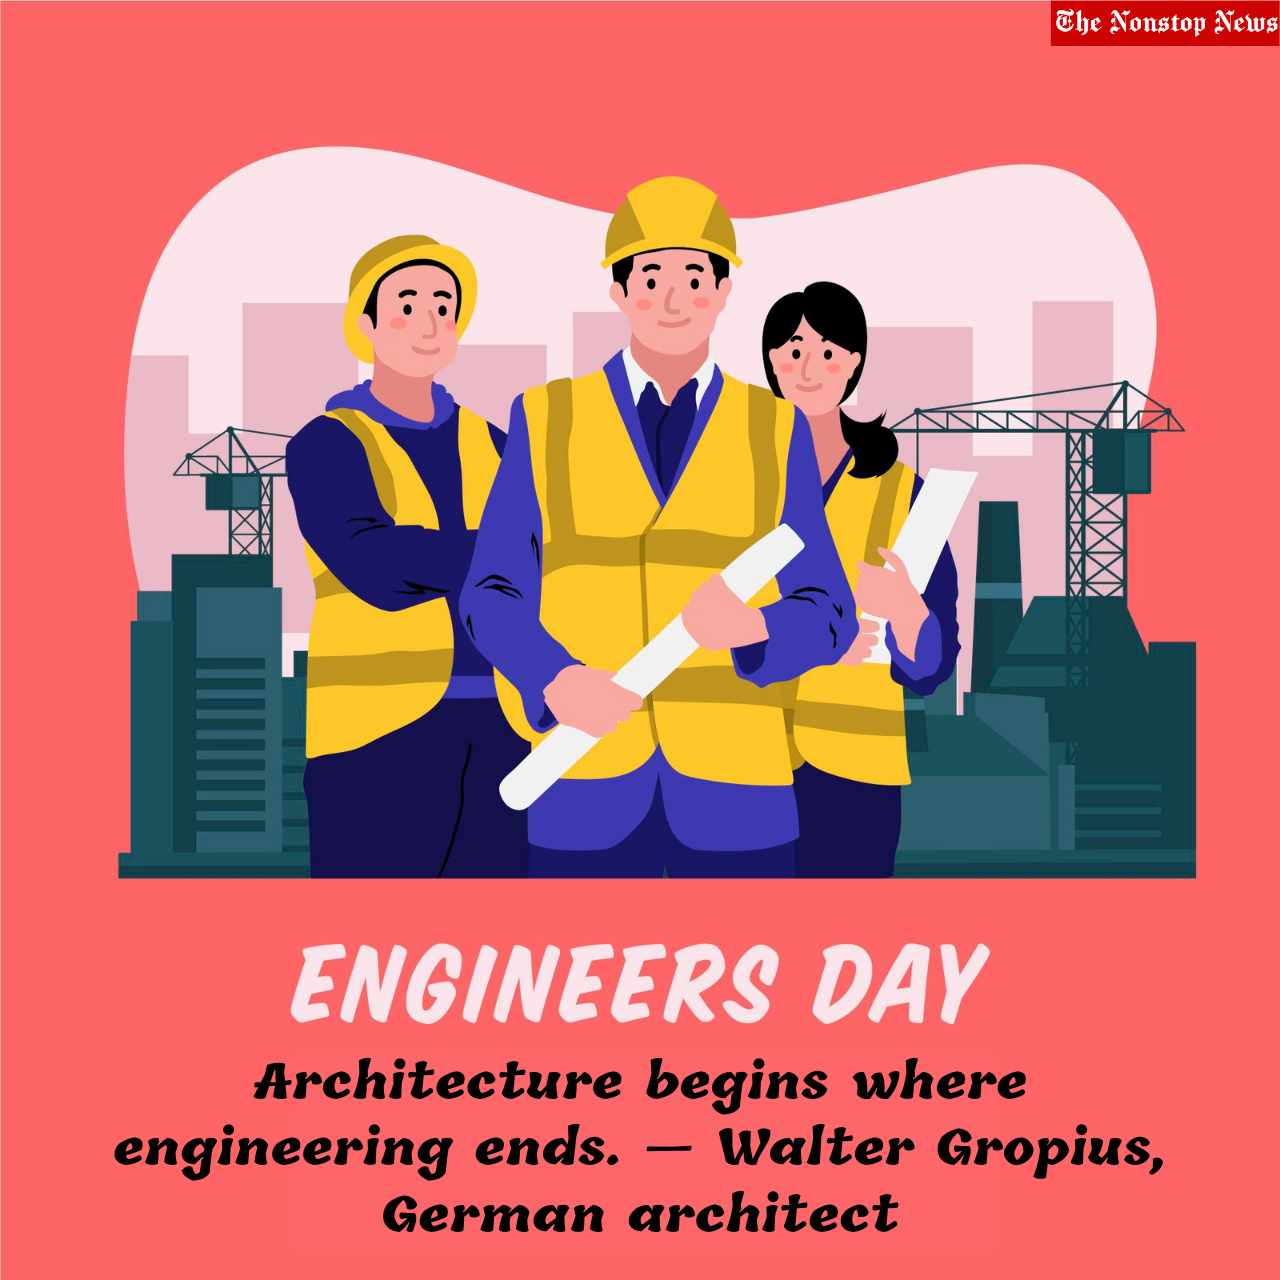 Engineer's Day 2022: Quotes, Slogans, Messages, Images, Greetings, Posters, and Wishes